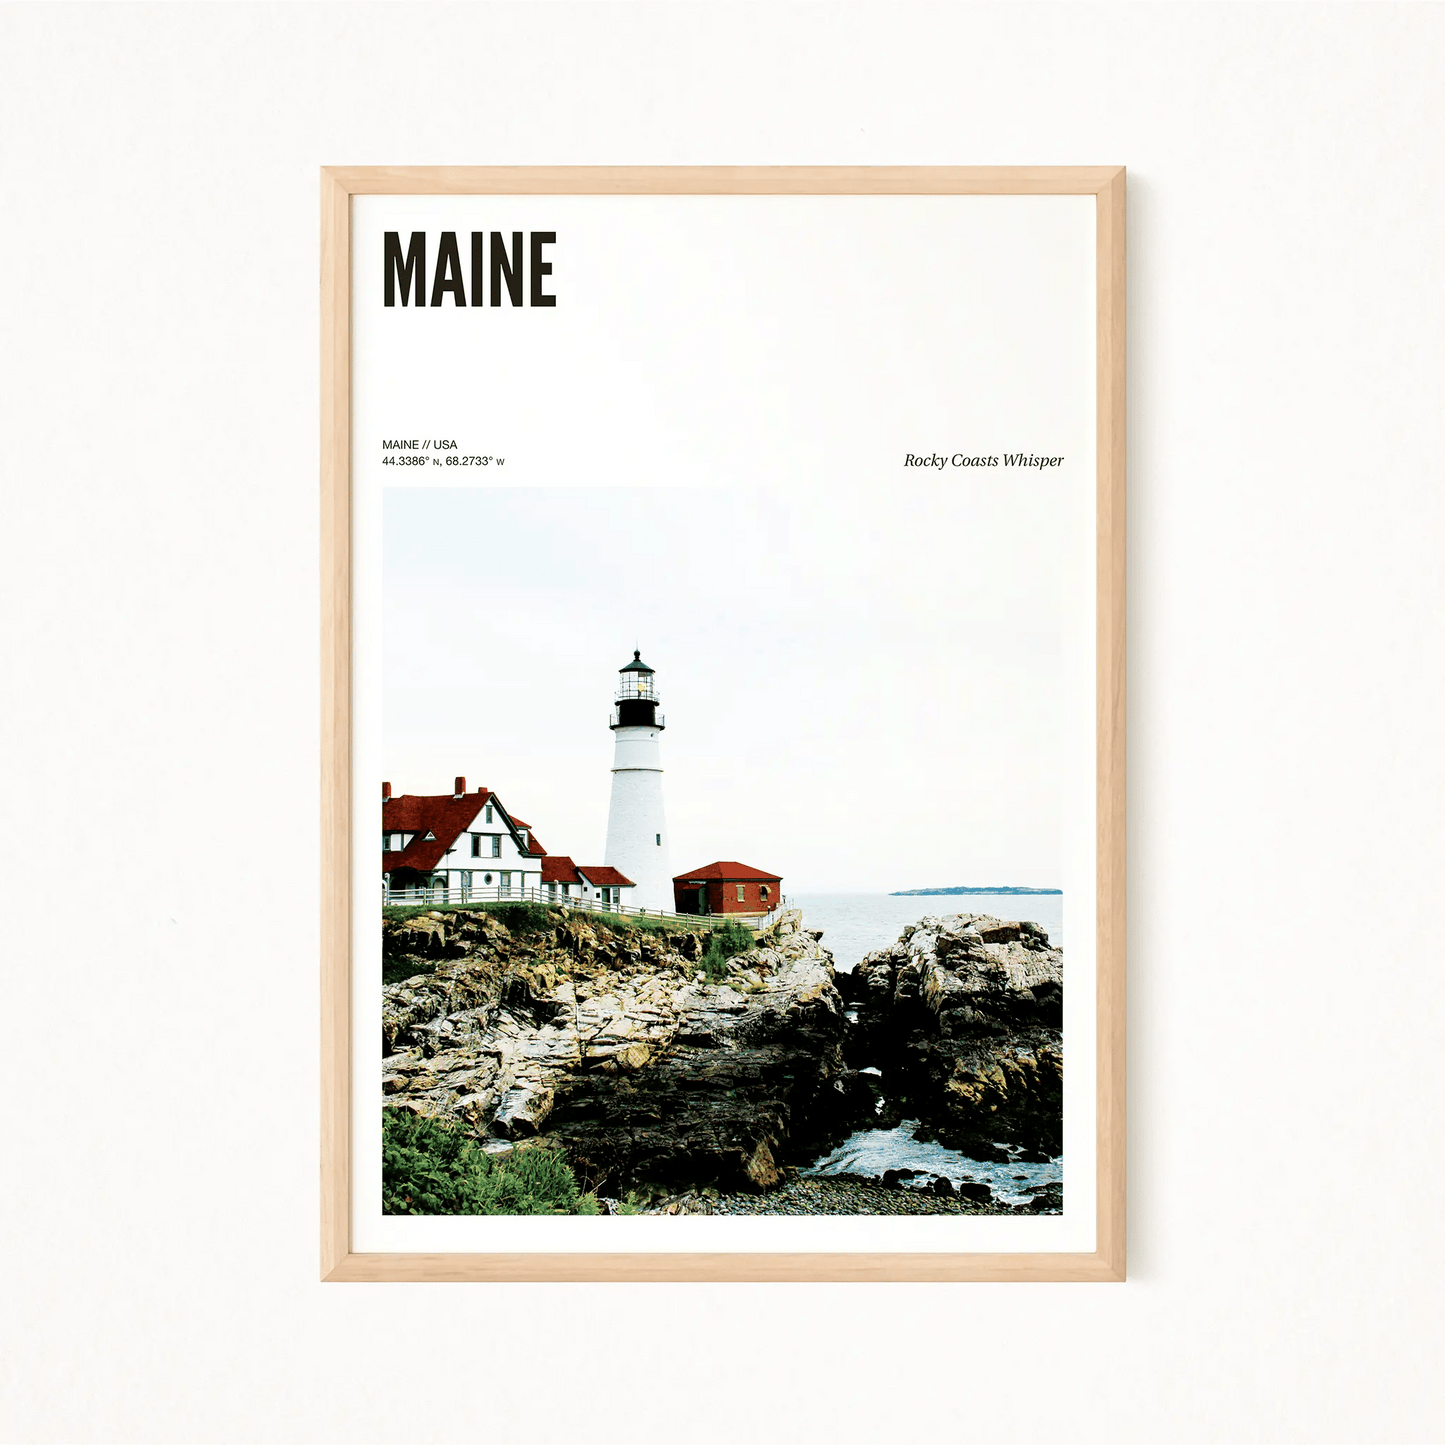 Maine Odyssey Poster - The Globe Gallery